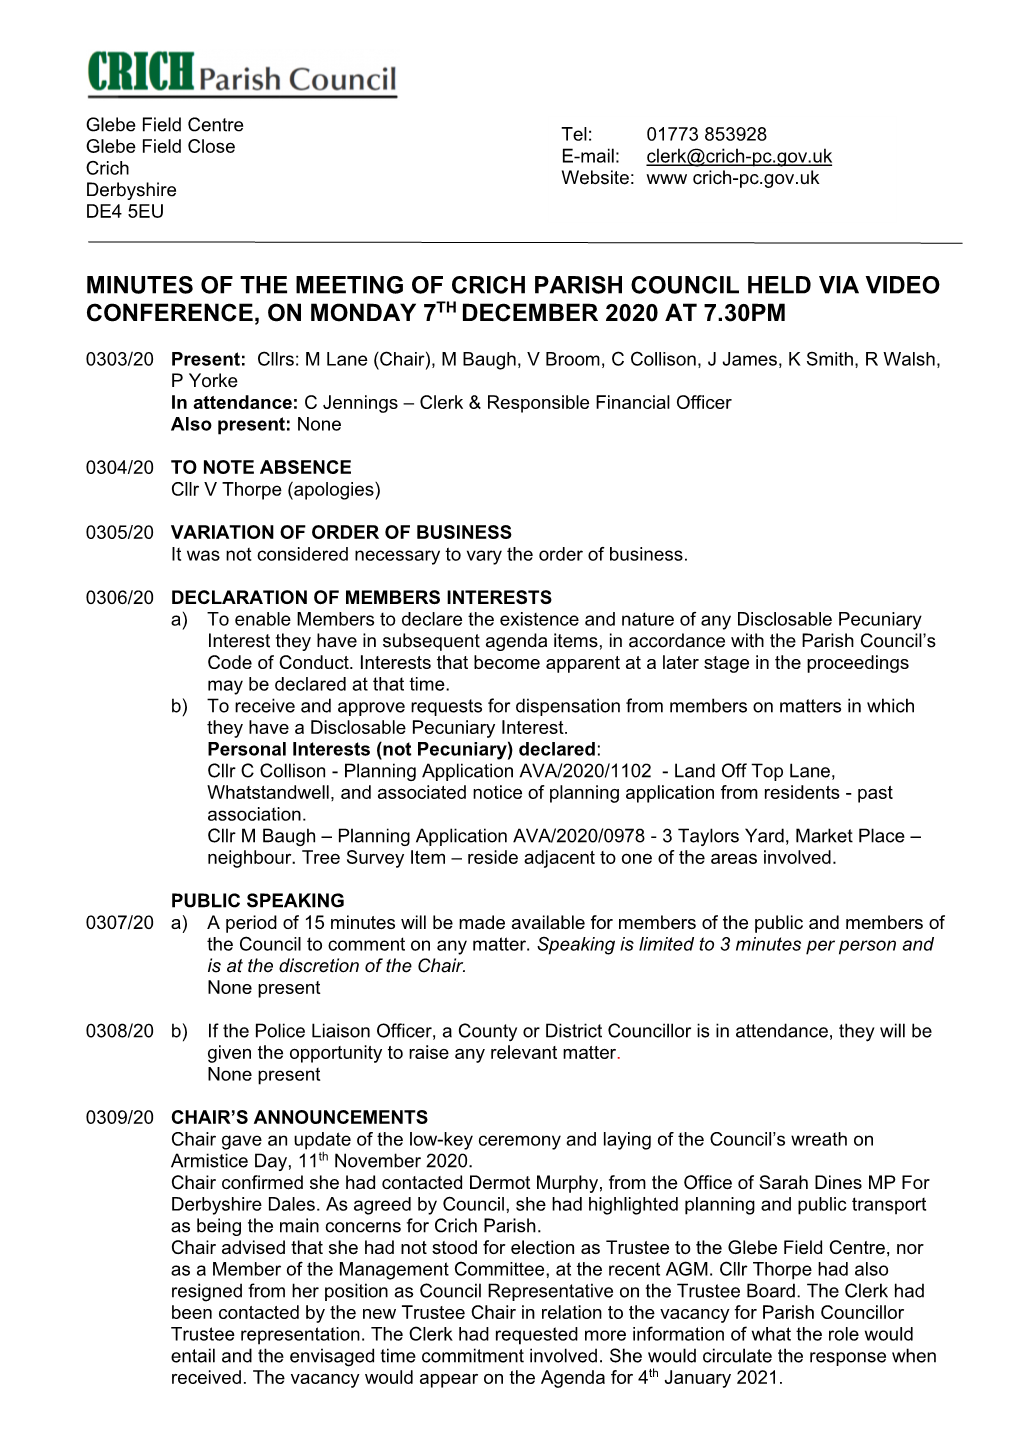 Minutes of the Meeting of Crich Parish Council Held Via Video Conference, on Monday 7Th December 2020 at 7.30Pm